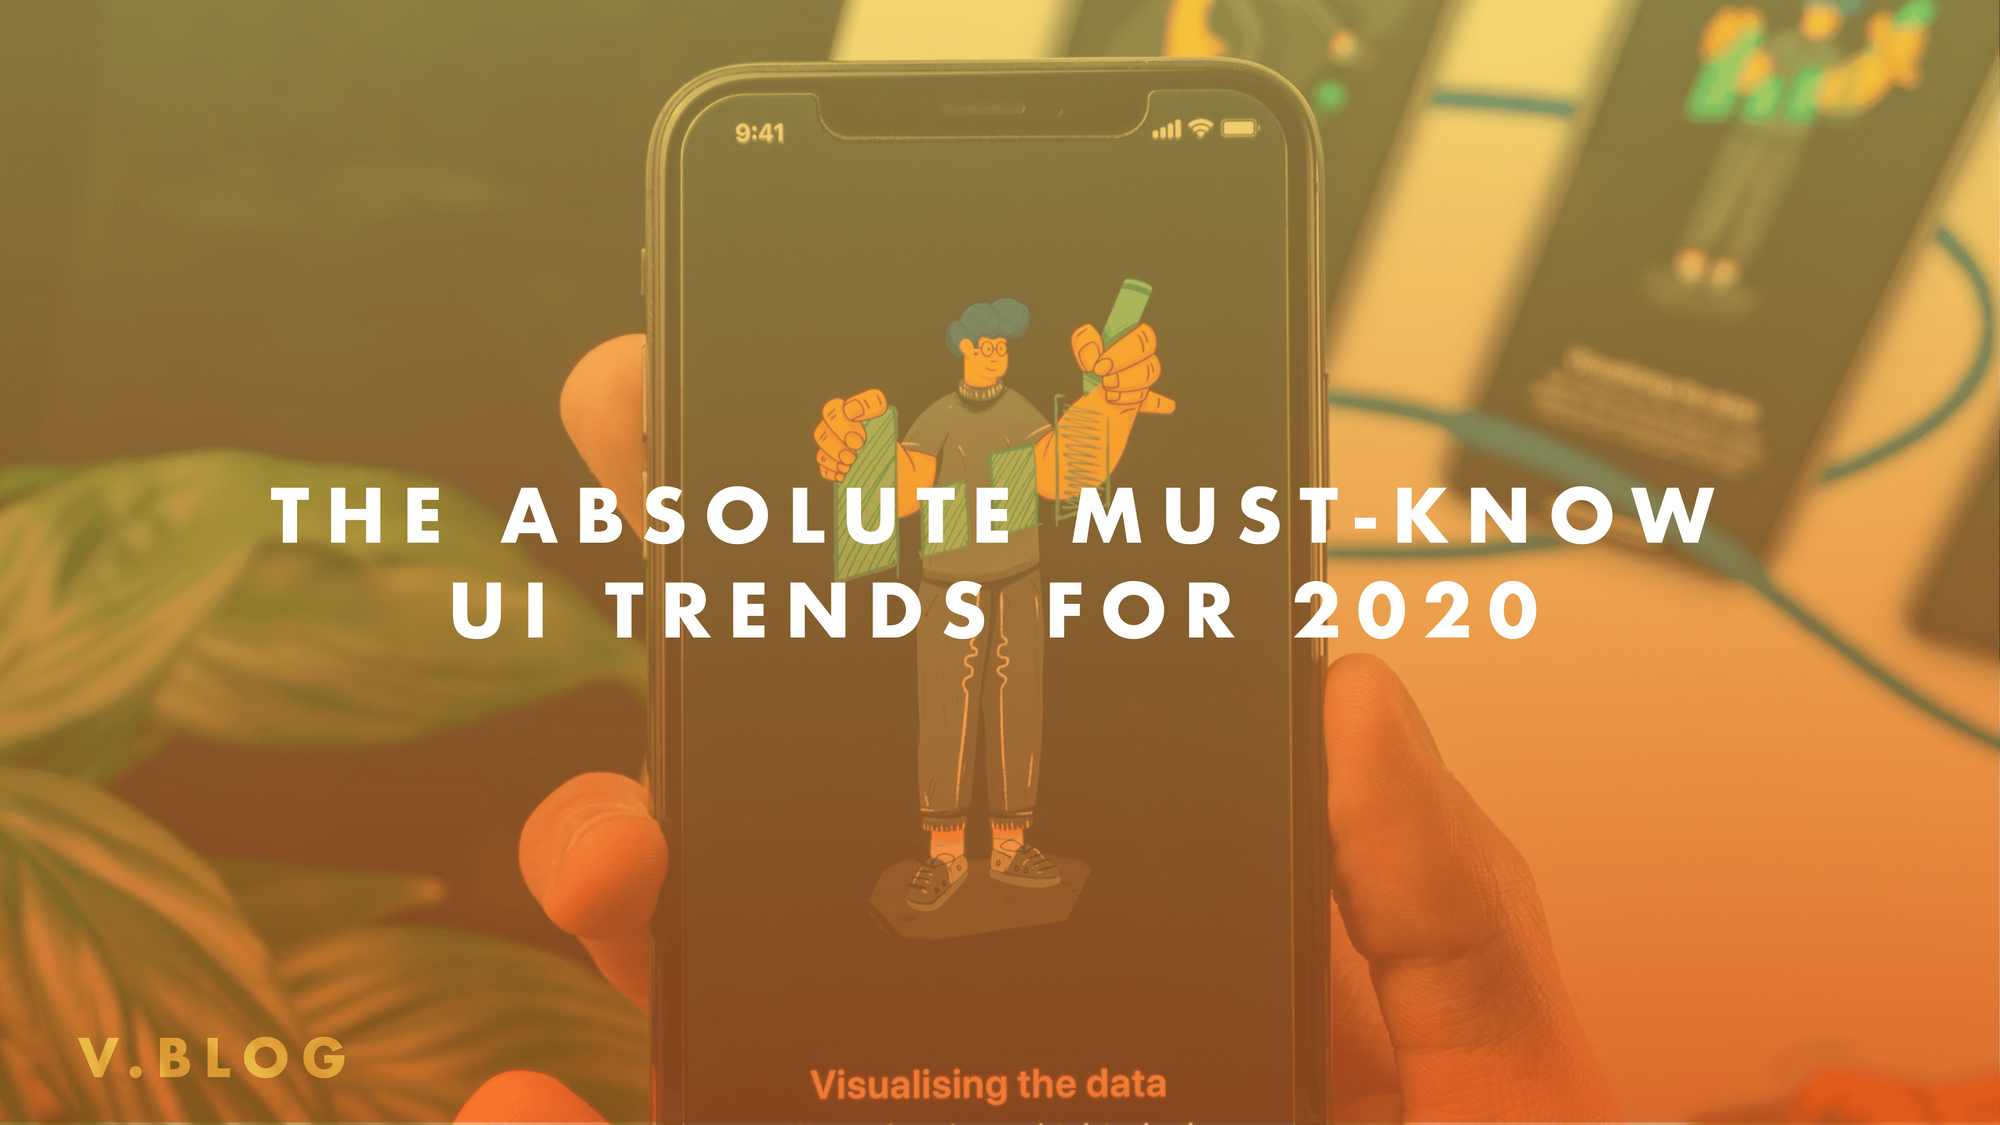 Smartphone displaying UI design with text 'The absolute must-know UI trends for 2020'